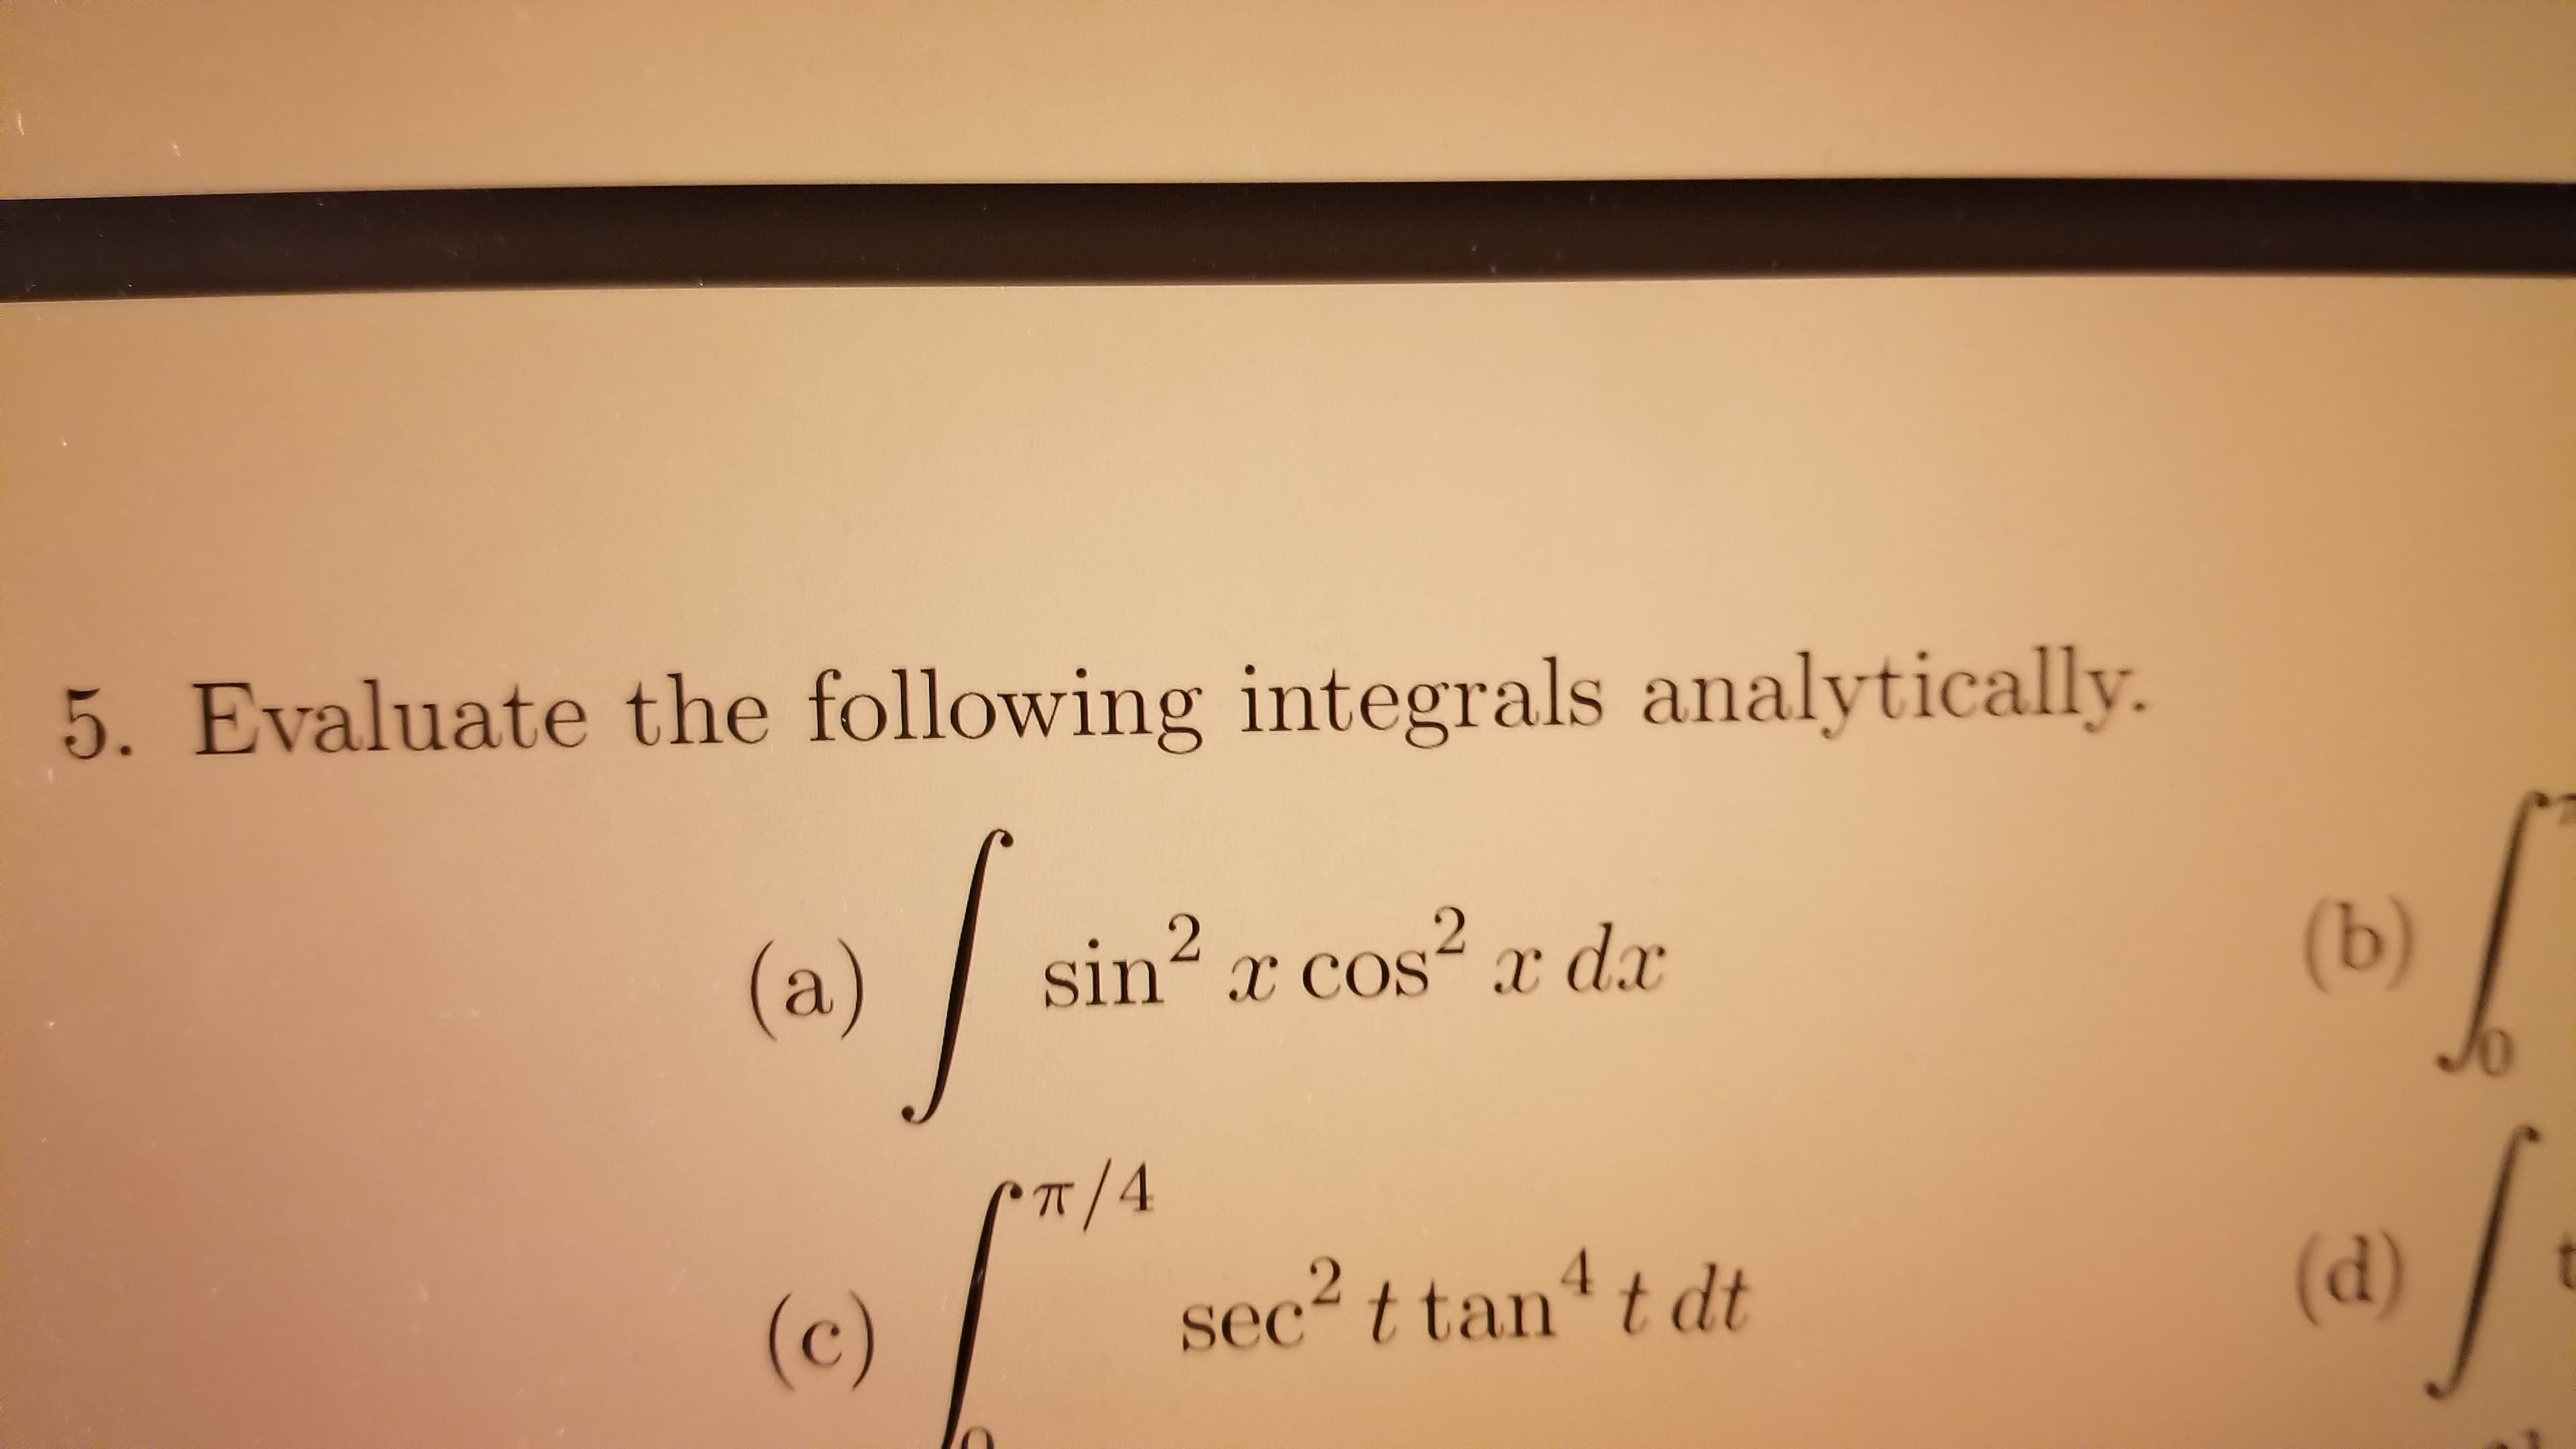 5. Evaluate the following integrals analytically.
(a)
sin? r cos? r da
2.
x COs
(b)
T/4
4.
(c)
sec? t tan“ t dt
(d)
(0)
